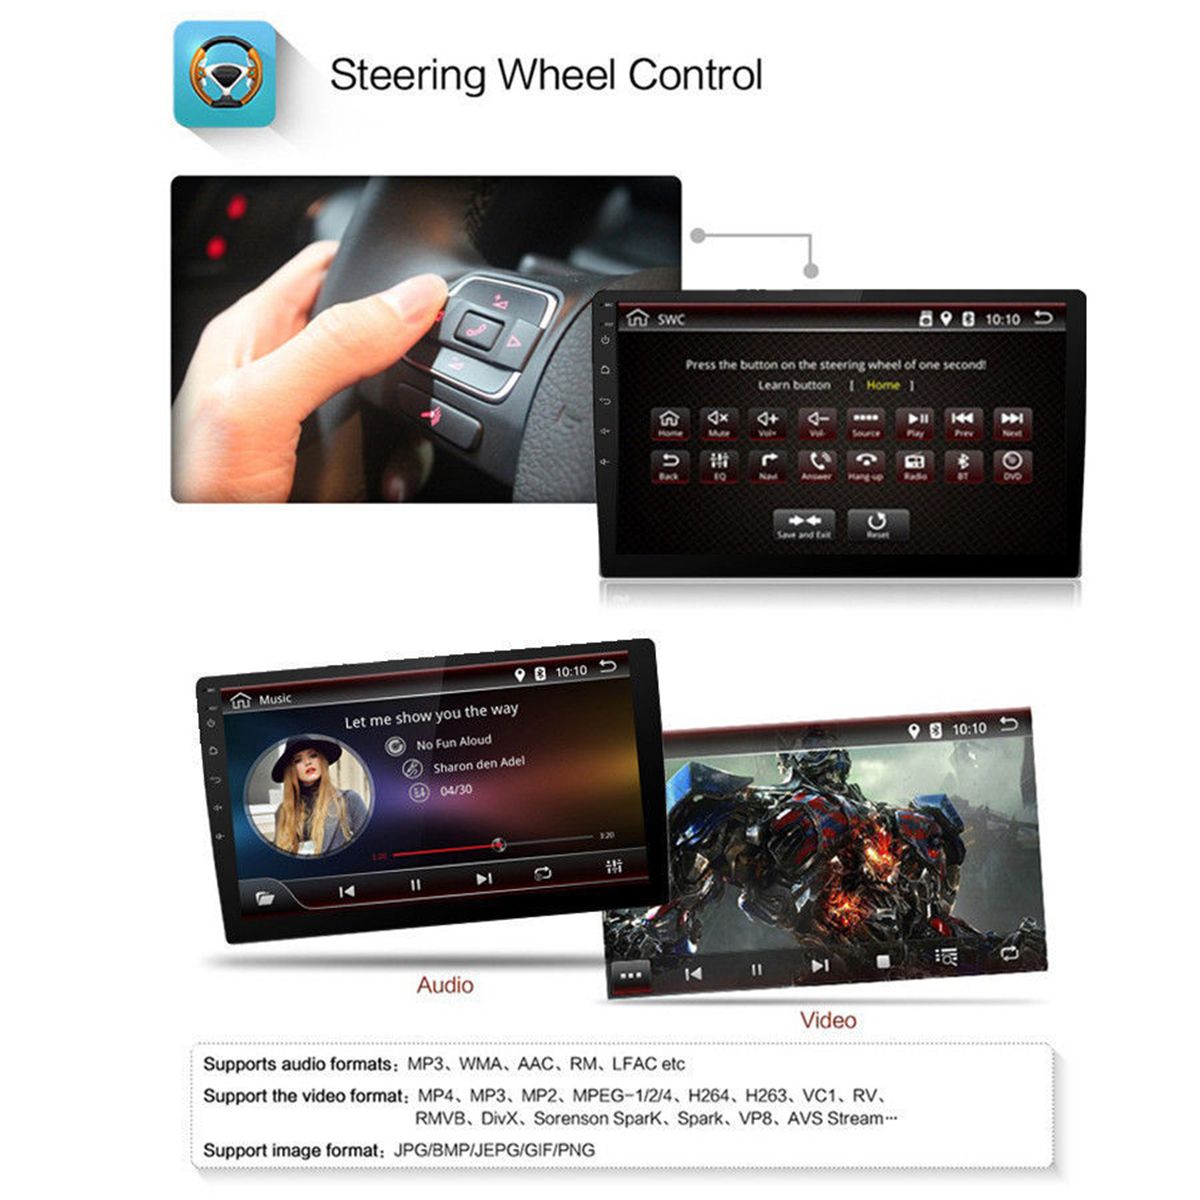 YUEHOO-101-Inch-2-DIN-for-Android-90-Car-Stereo-432G-Quad-Core-MP5-Player-GPS-WIFI-4G-AM-RDS-Radio-f-1564996